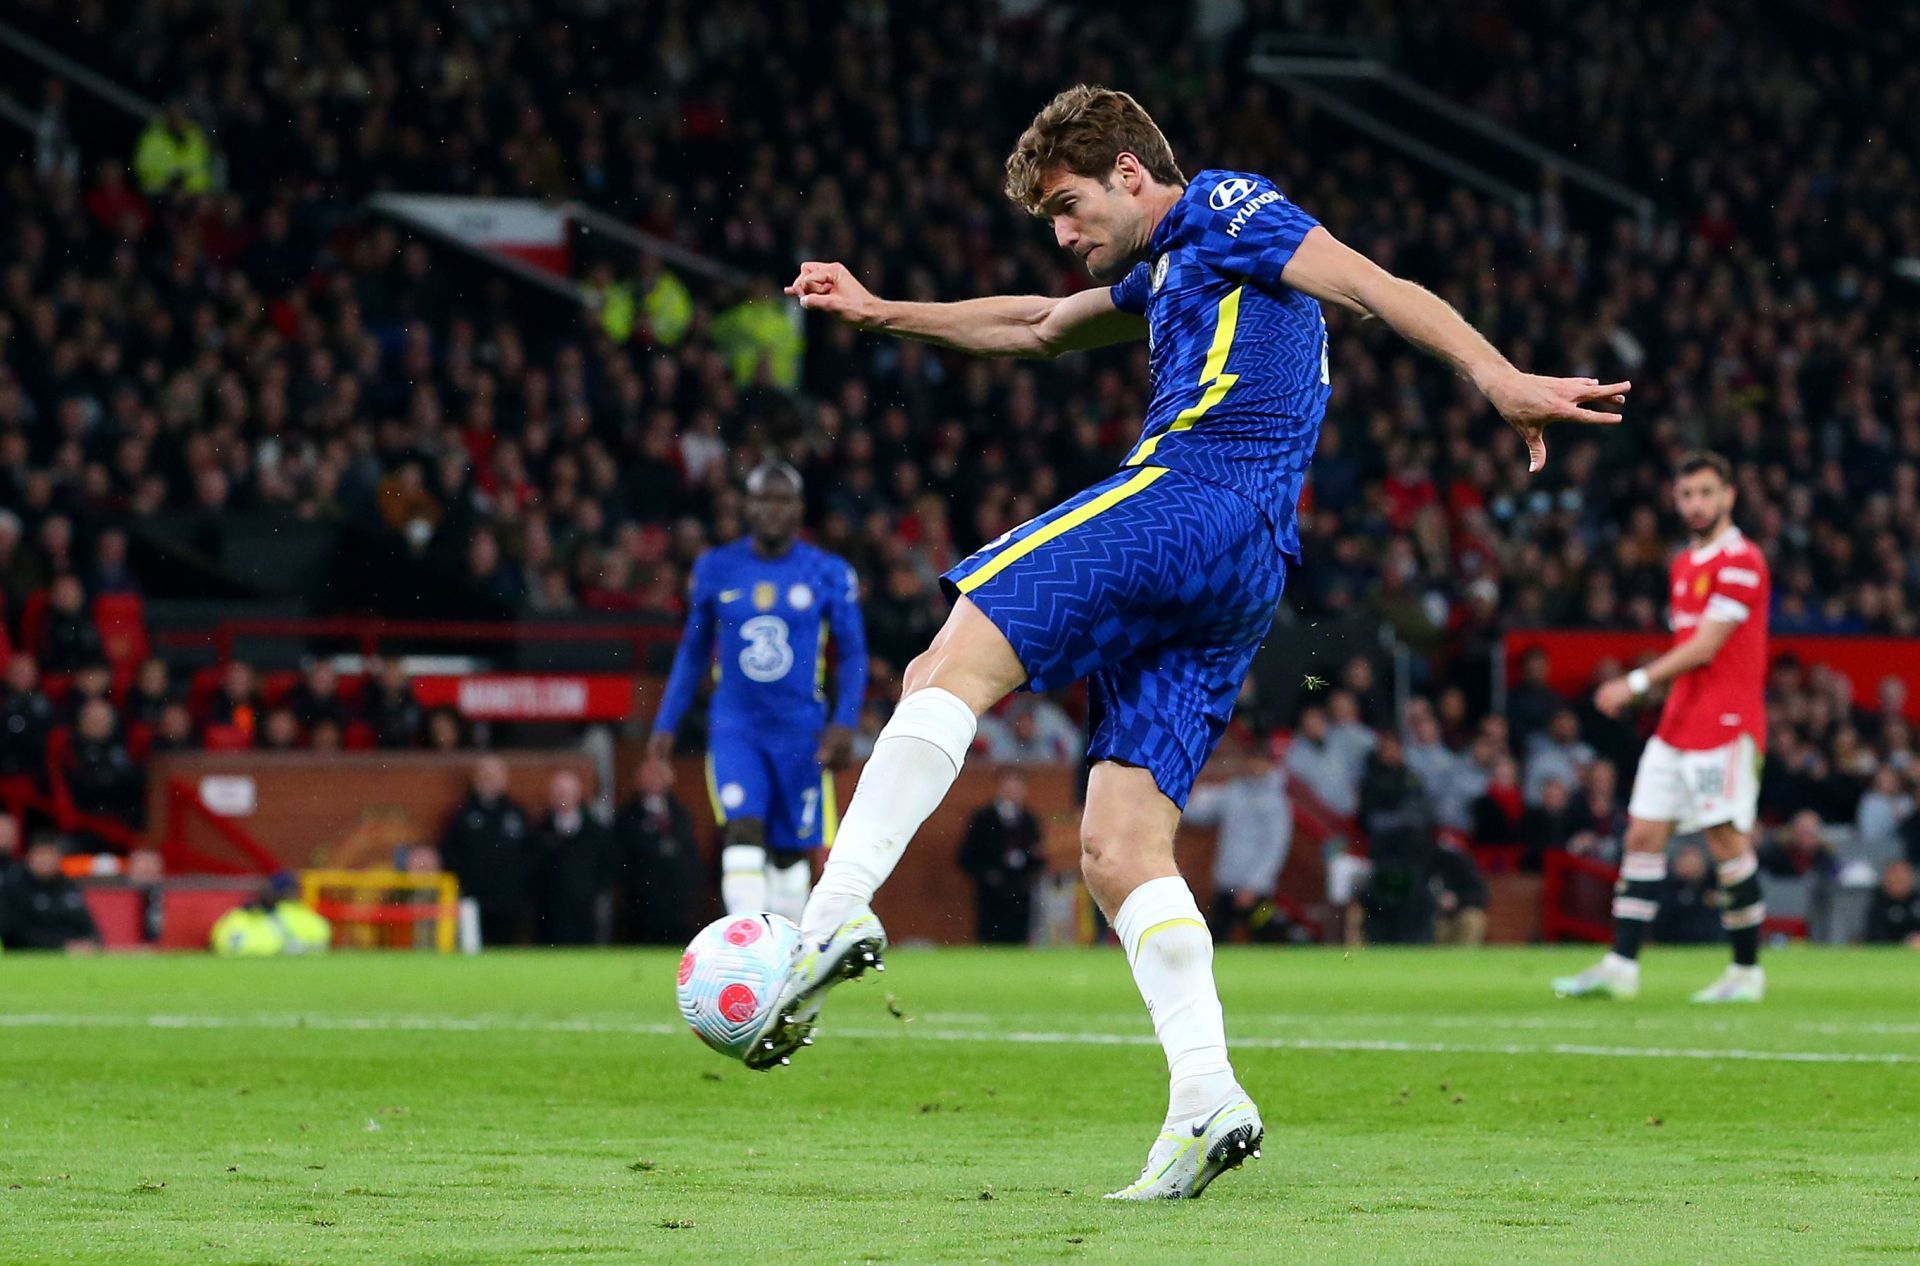 Marcos Alonso scored the opening goal of the game.